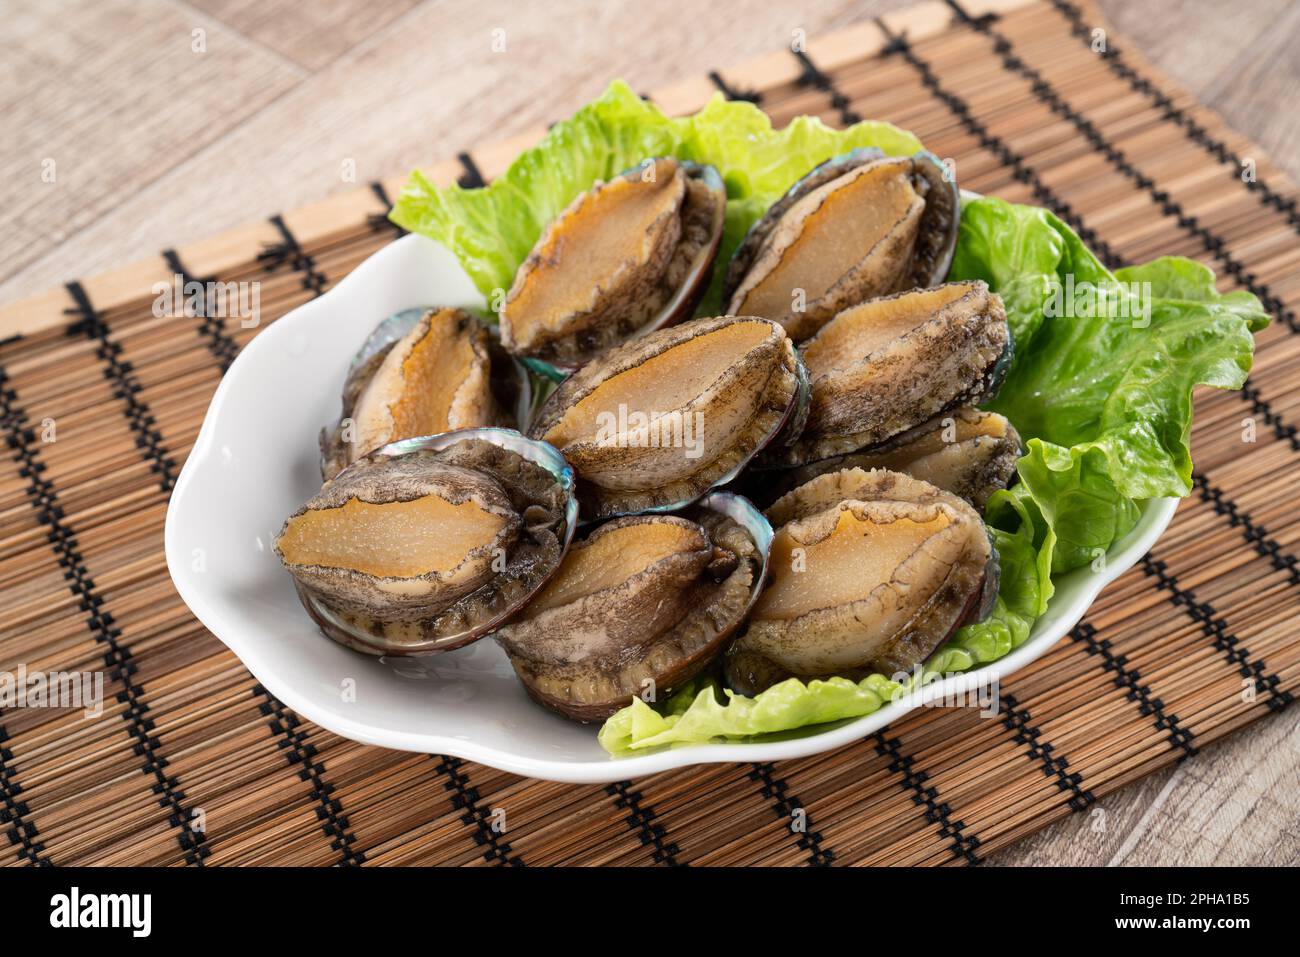 Delicious raw abalone in a plate with lettuce on wooden table background. Stock Photo